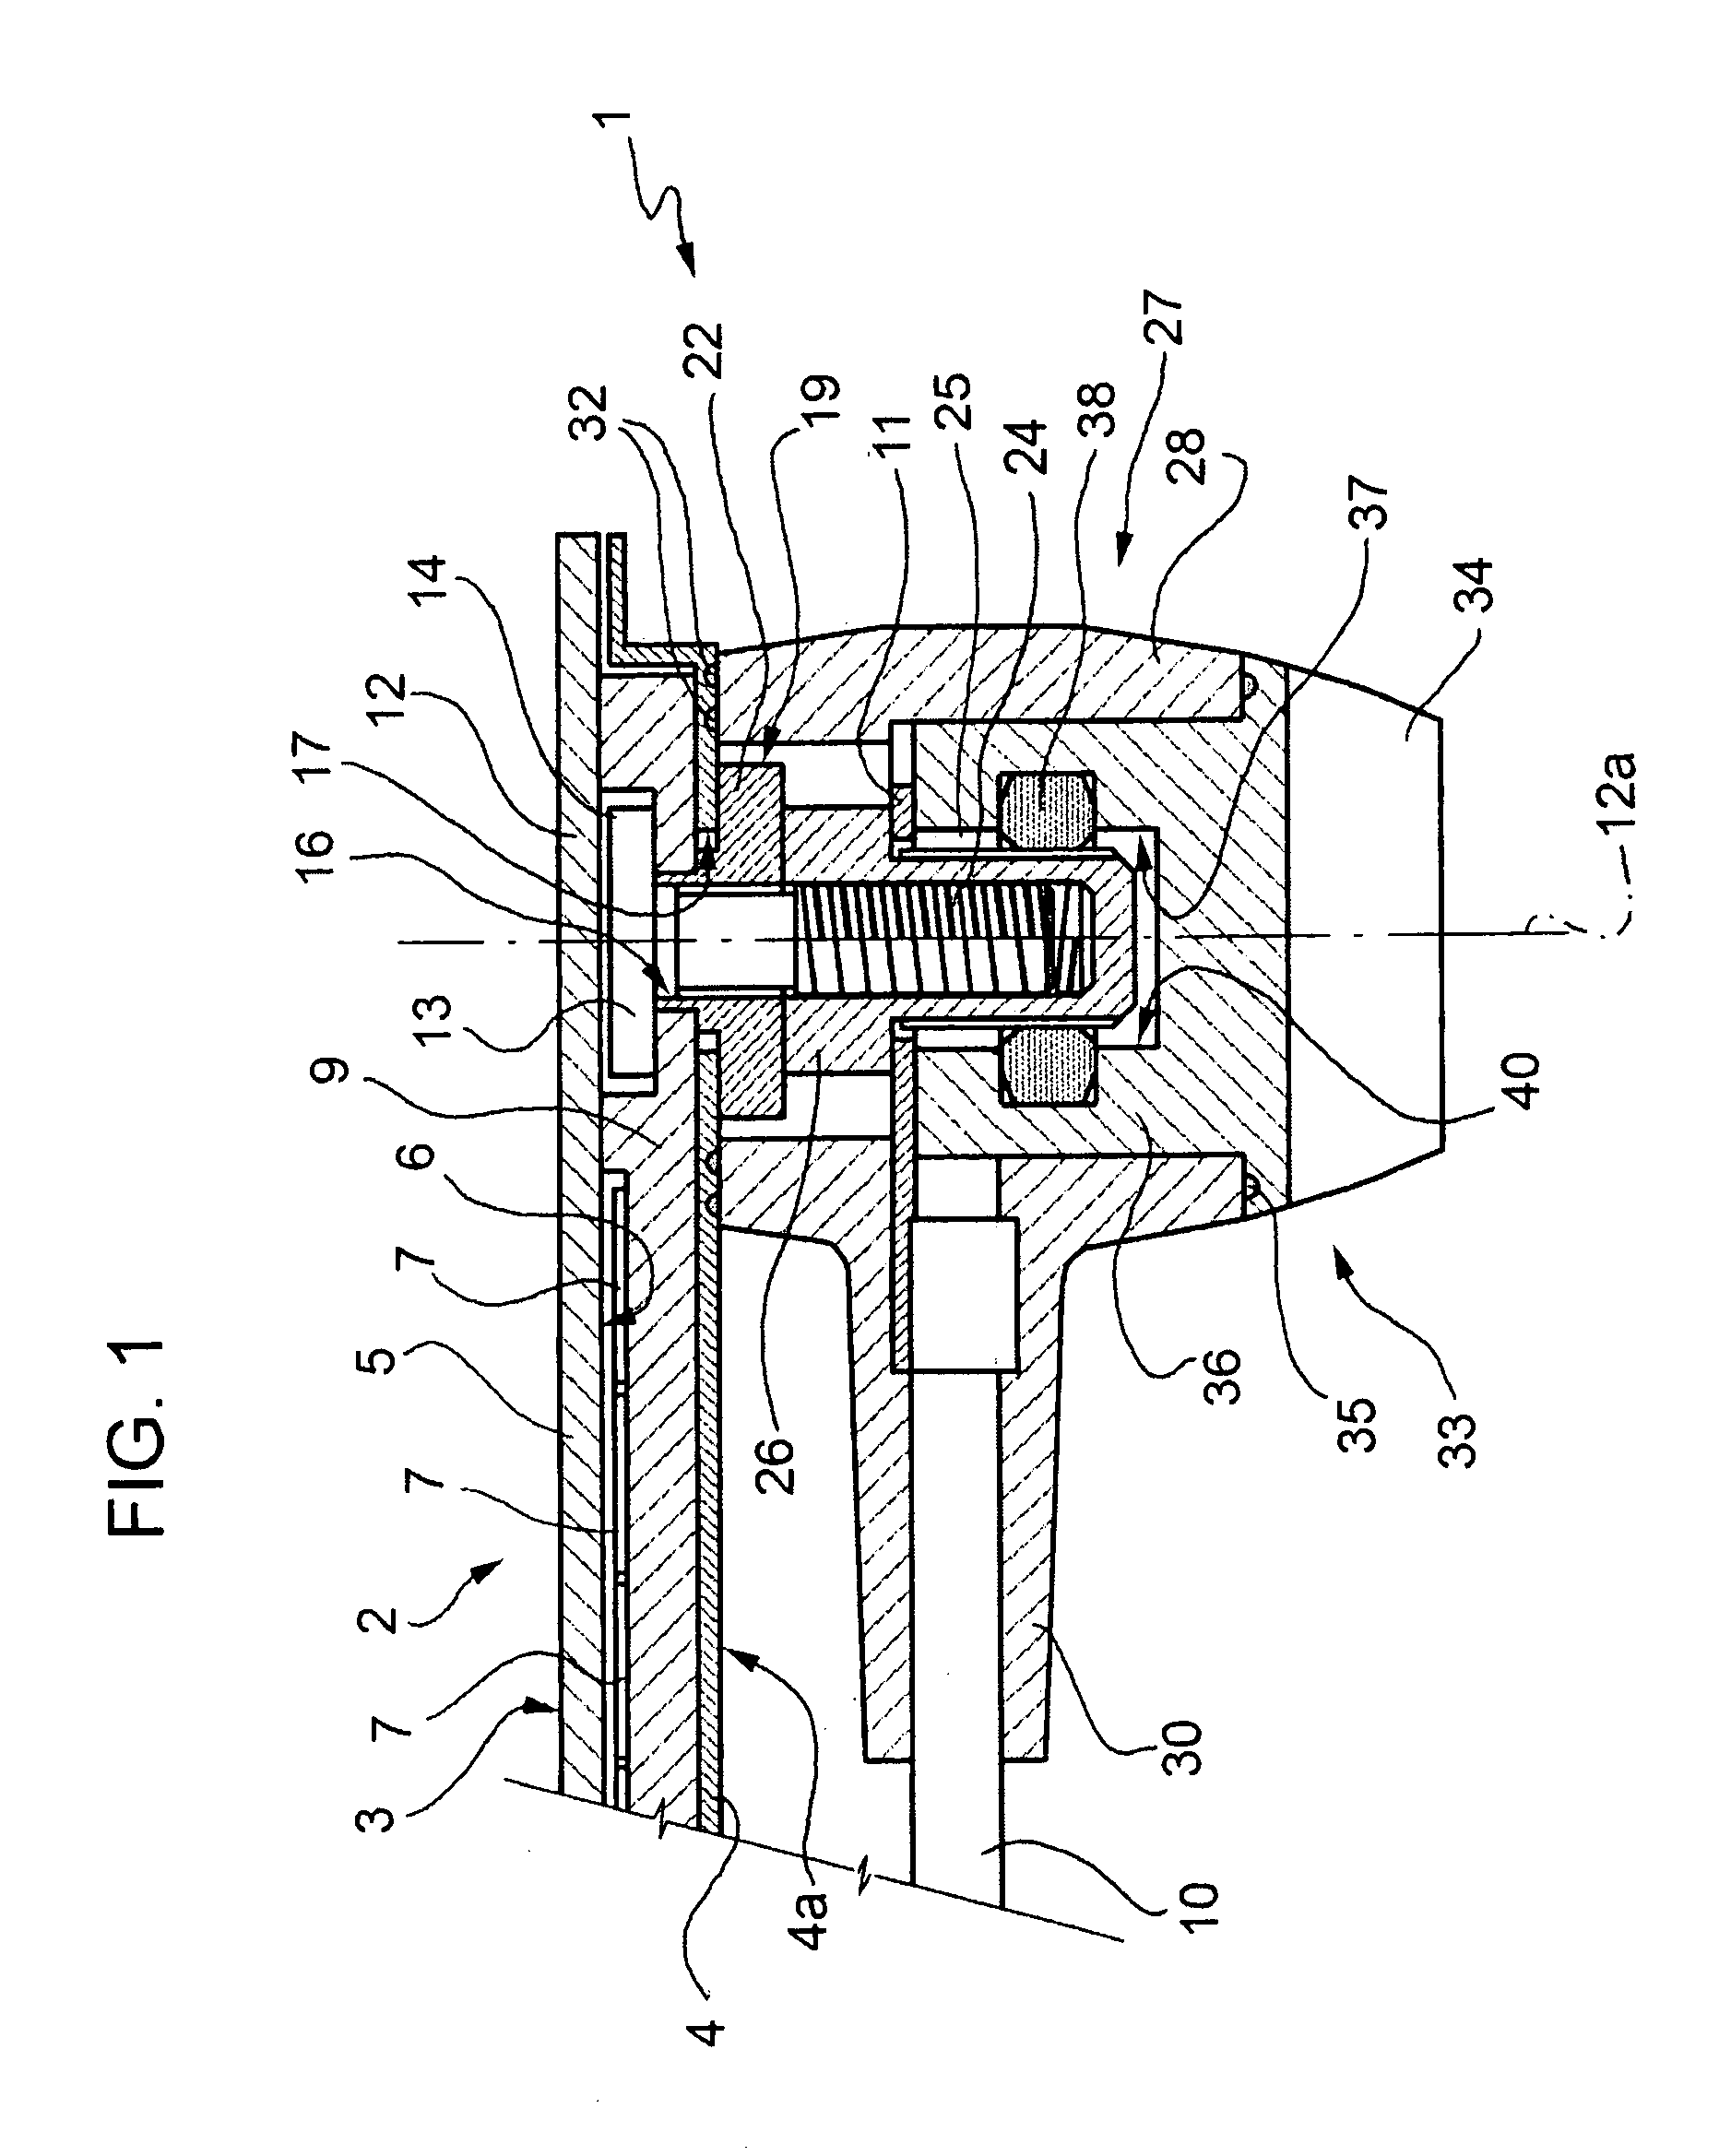 Electrical-connection device, particularly for photovoltaic-cell solar panels